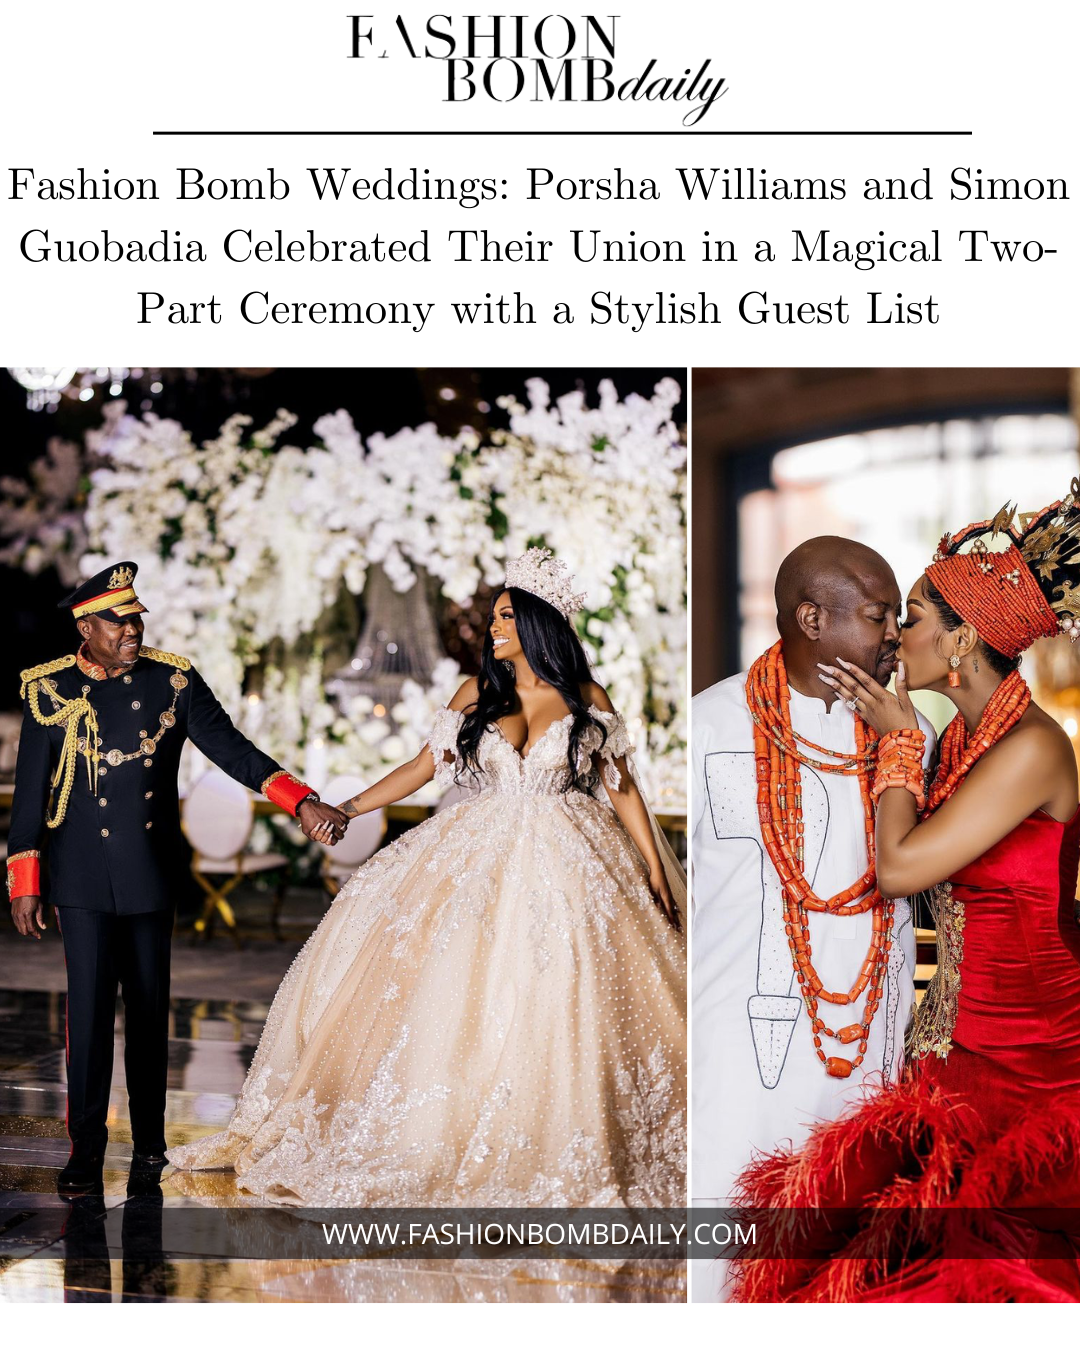 Fashion Bomb Weddings: Porsha Williams and Simon Guobadia Celebrated Their Union in a Magical Two-Part Ceremony with a Stylish Guest List